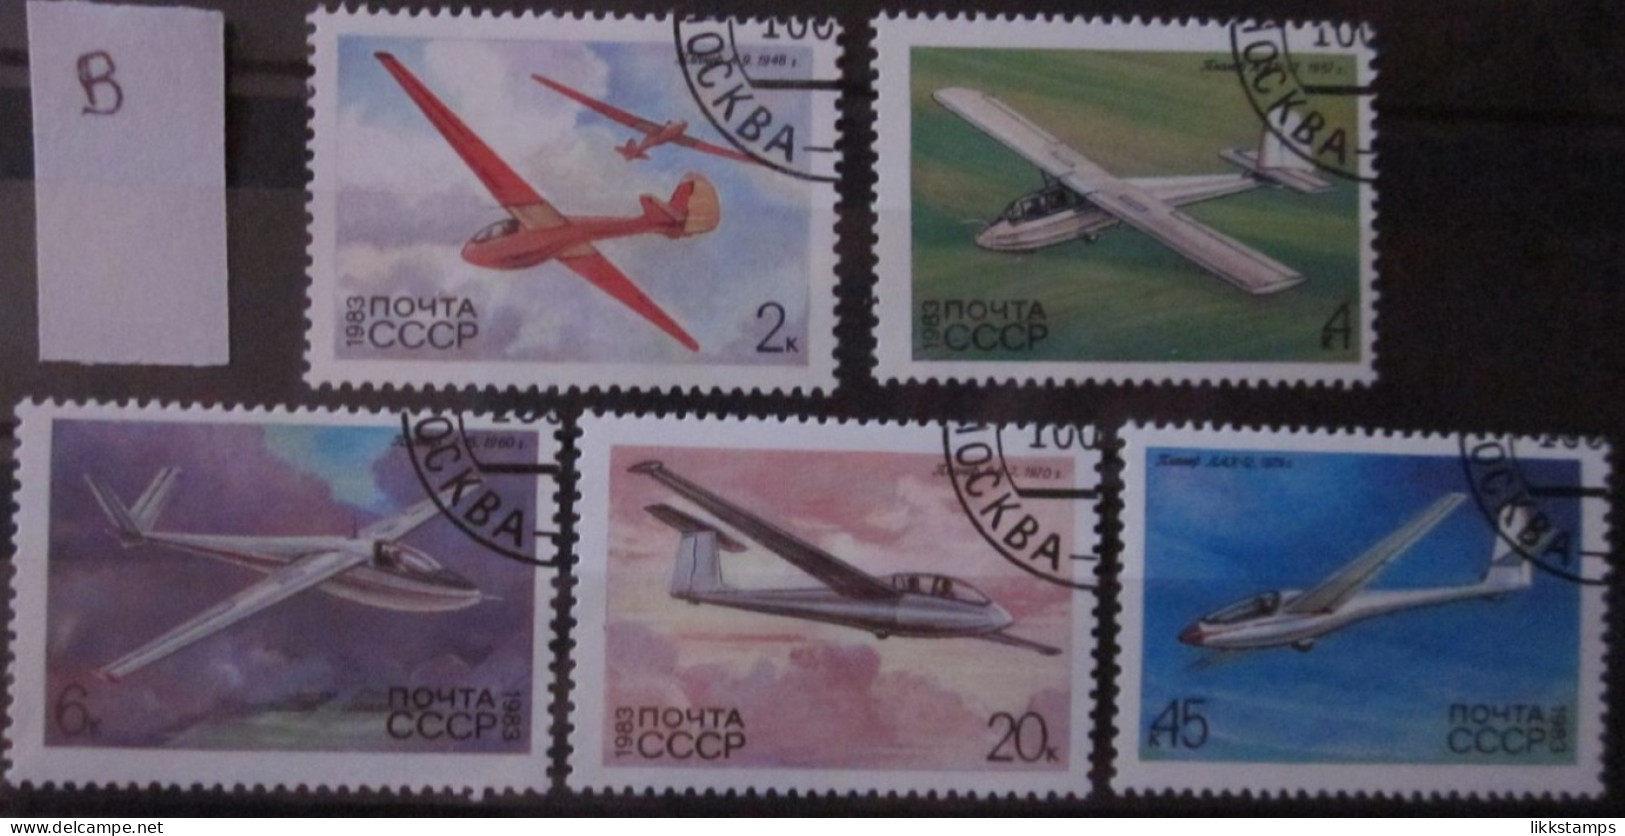 RUSSIA ~ 1983 ~ S.G. NUMBERS 5301 - 5305, ~ 'LOT B' ~ GLIDERS. ~ VFU #03634 - Used Stamps